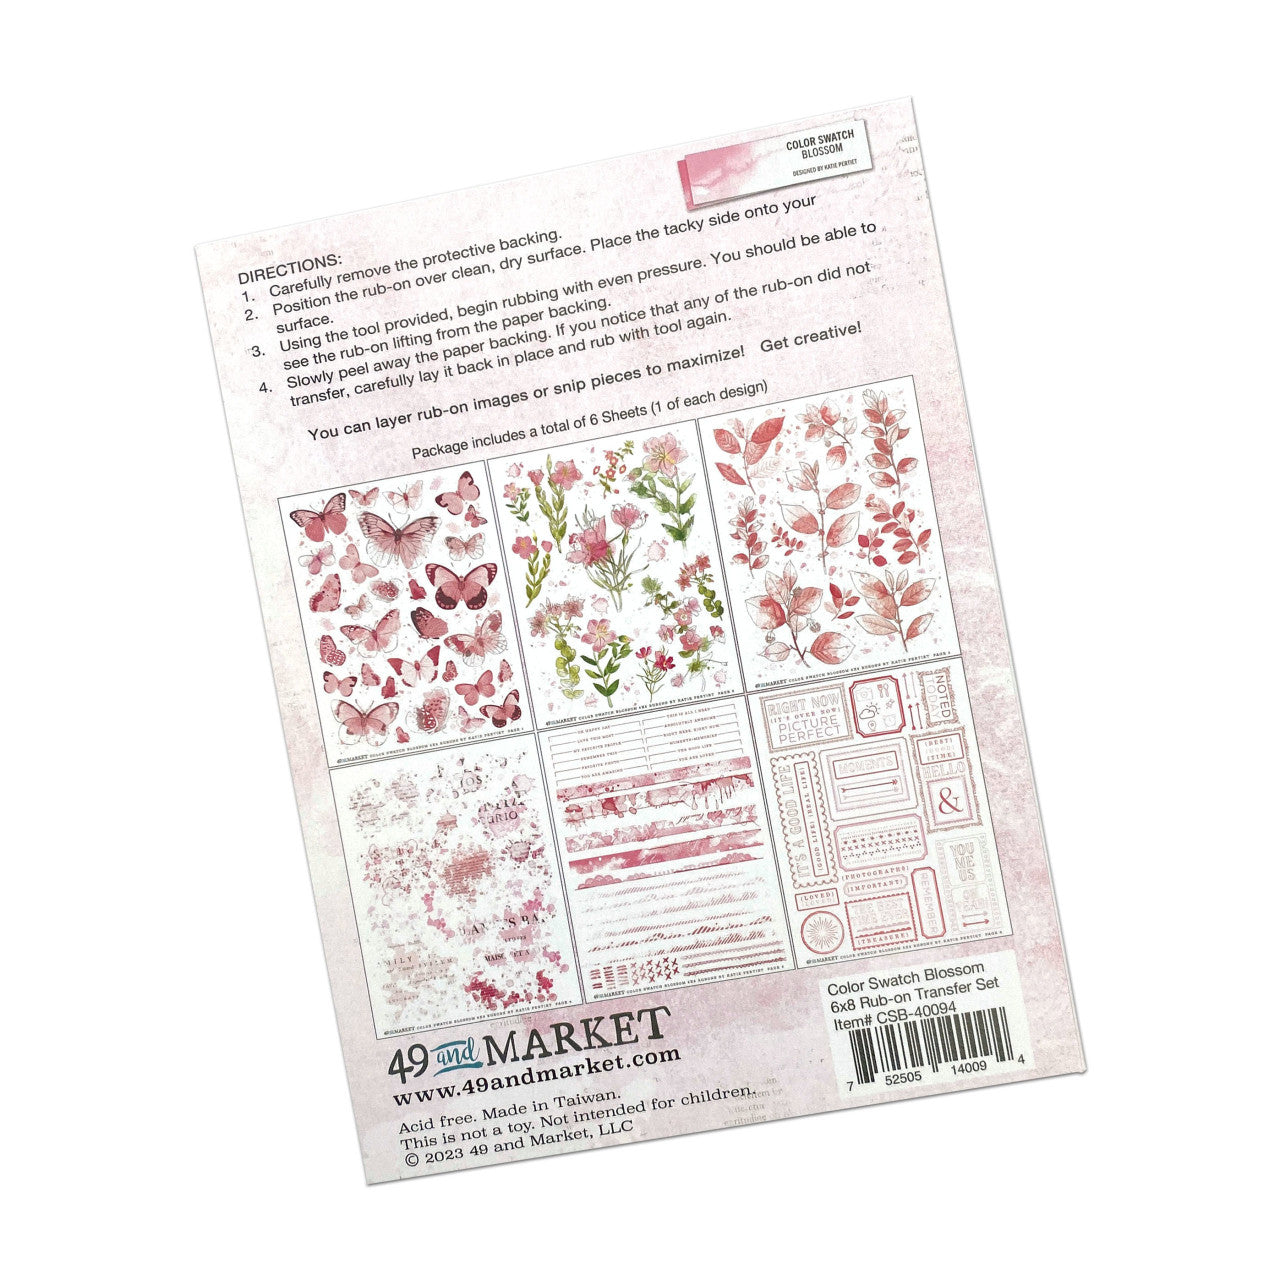 49 and Market Color Swatch Blossom Rub-on Transfer Set